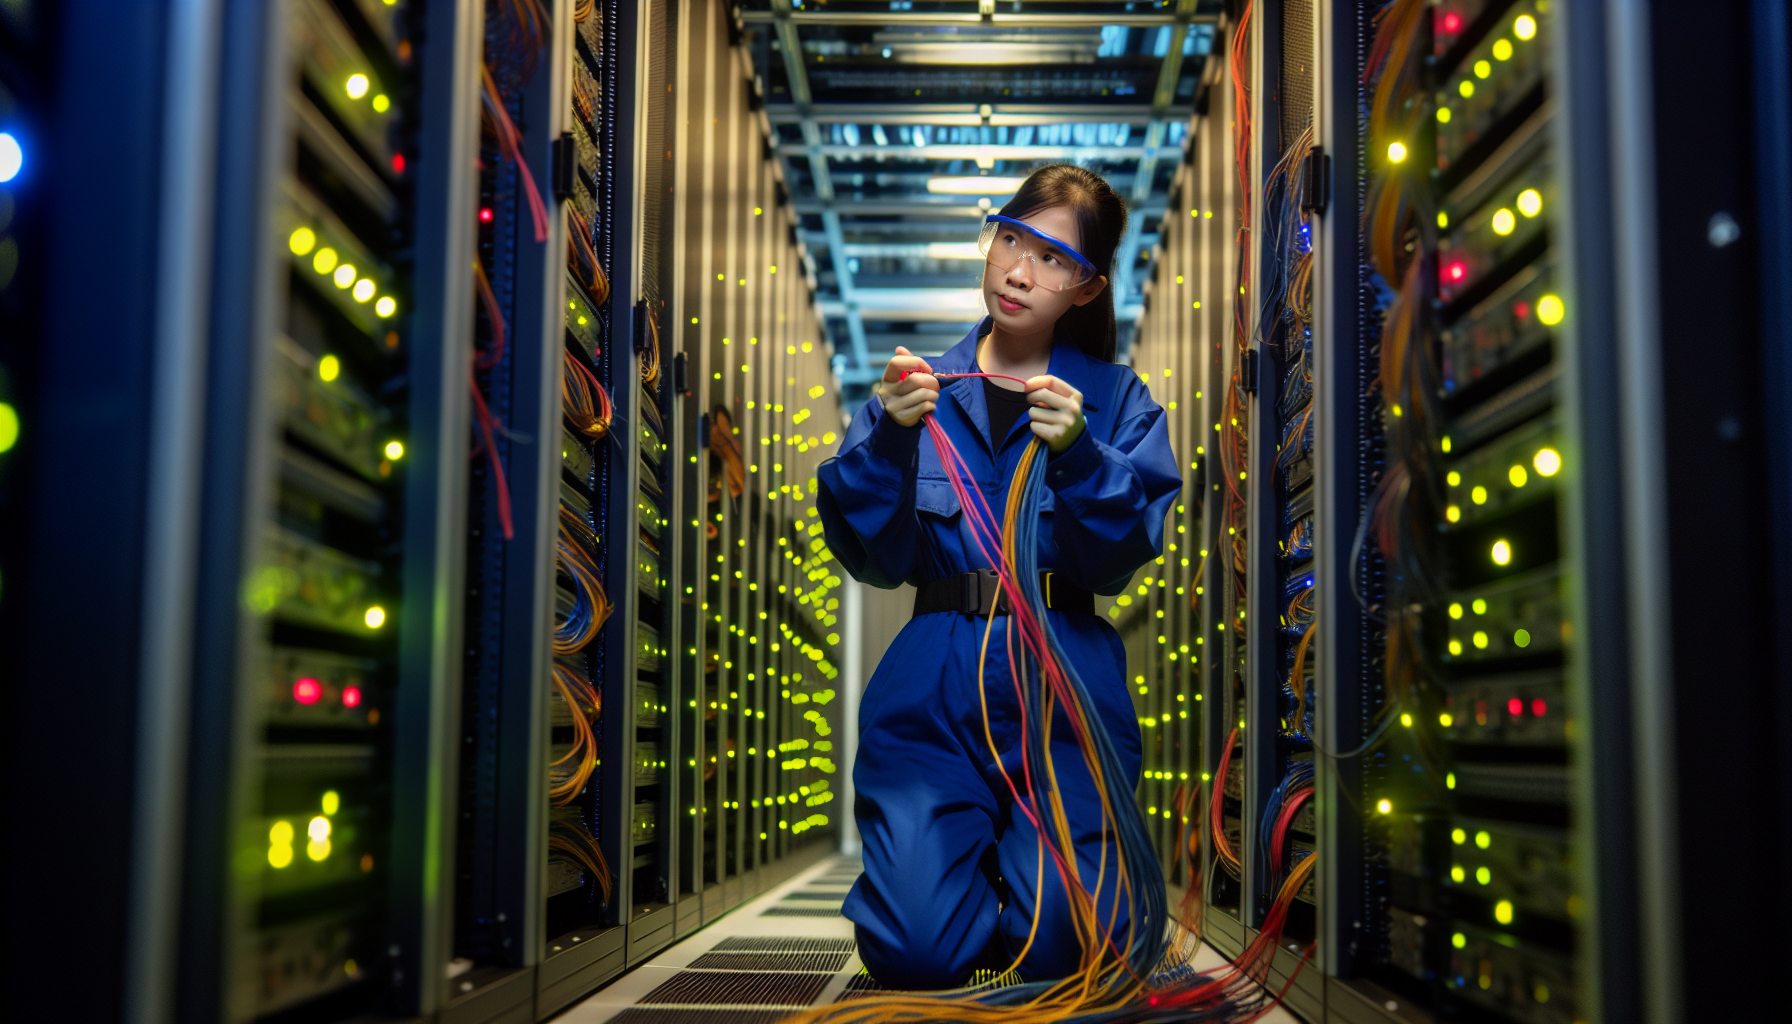 A technician installing low voltage cables in a data center